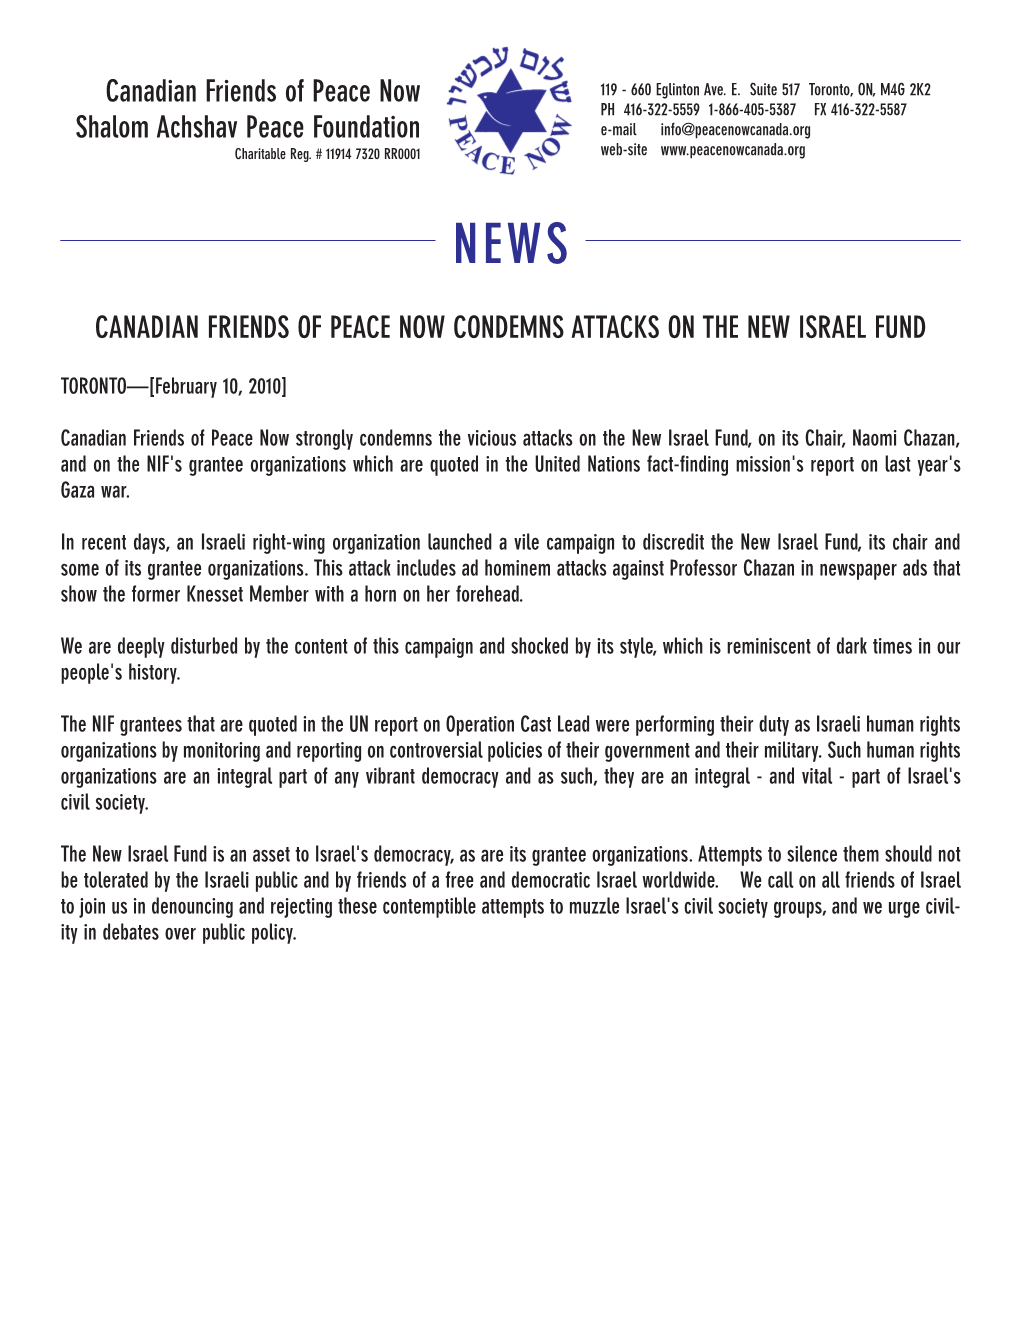 Canadian Friends of Peace Now Condemns Attacks on the New Israel Fund